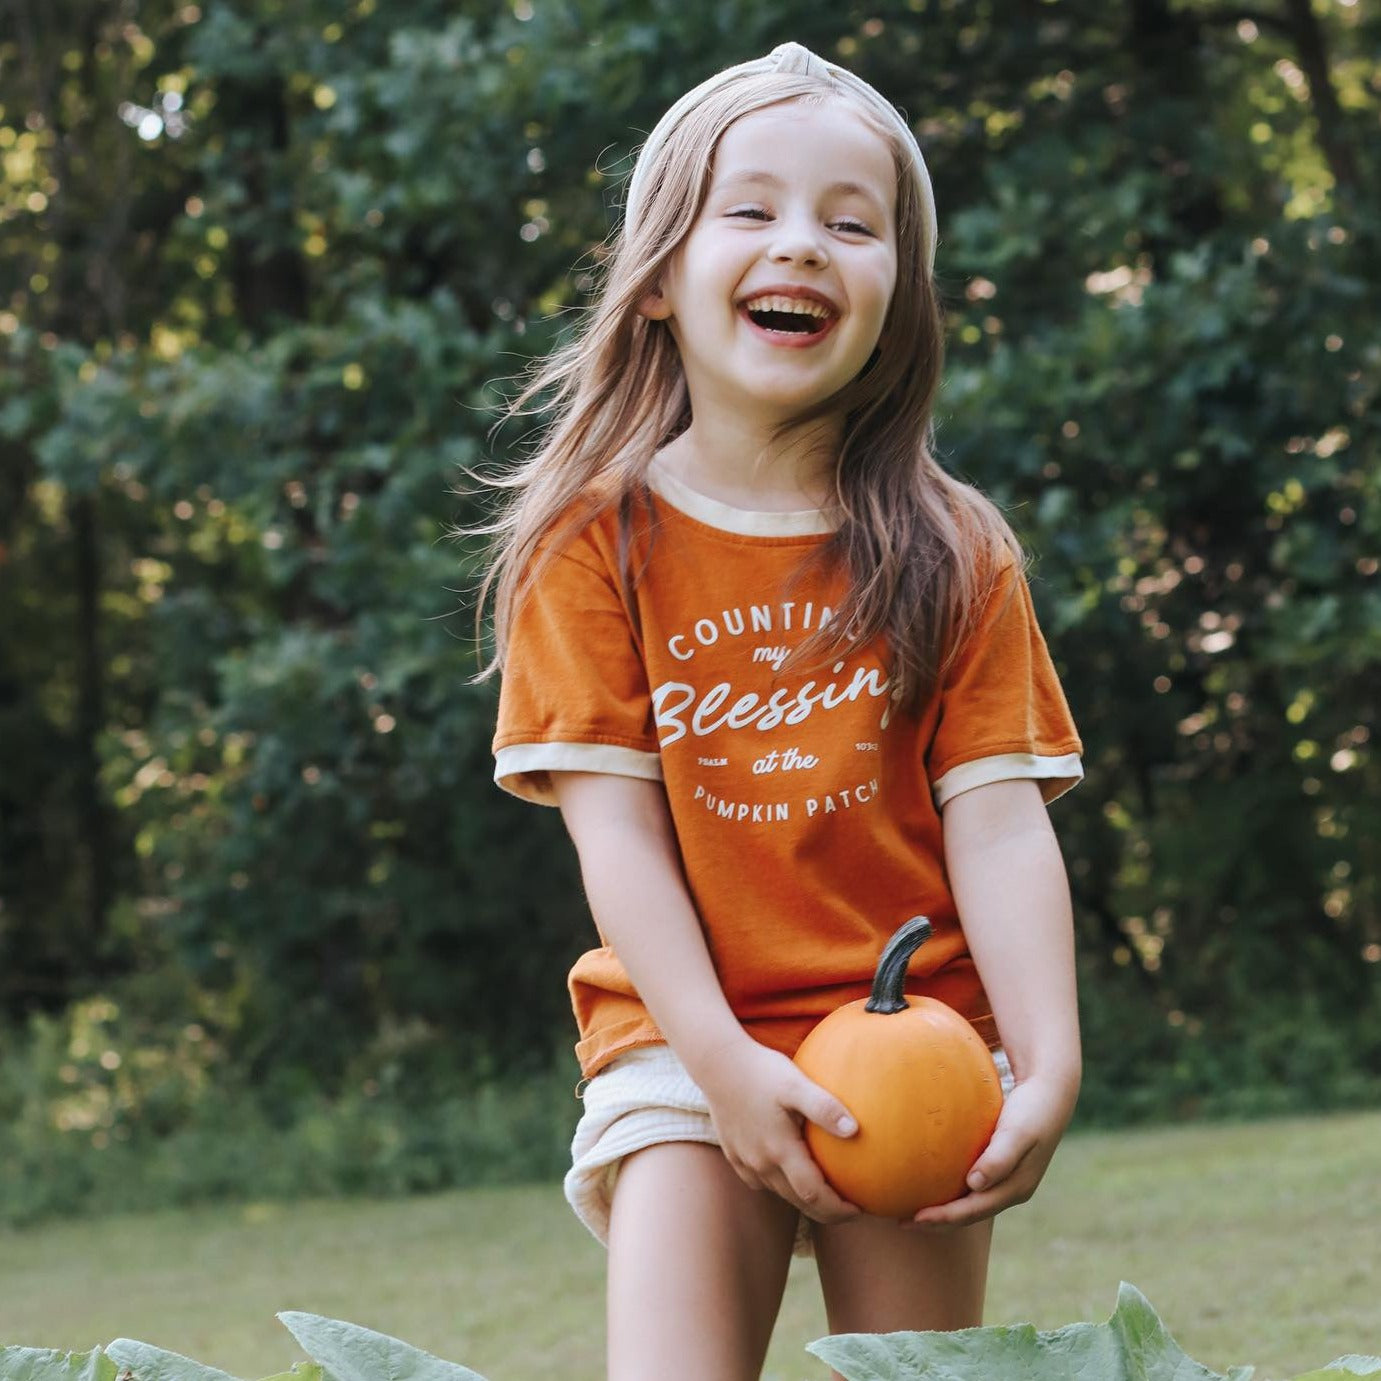 Counting my Blessings at the Pumpkin Patch - Toddler Tee - Little & Brave